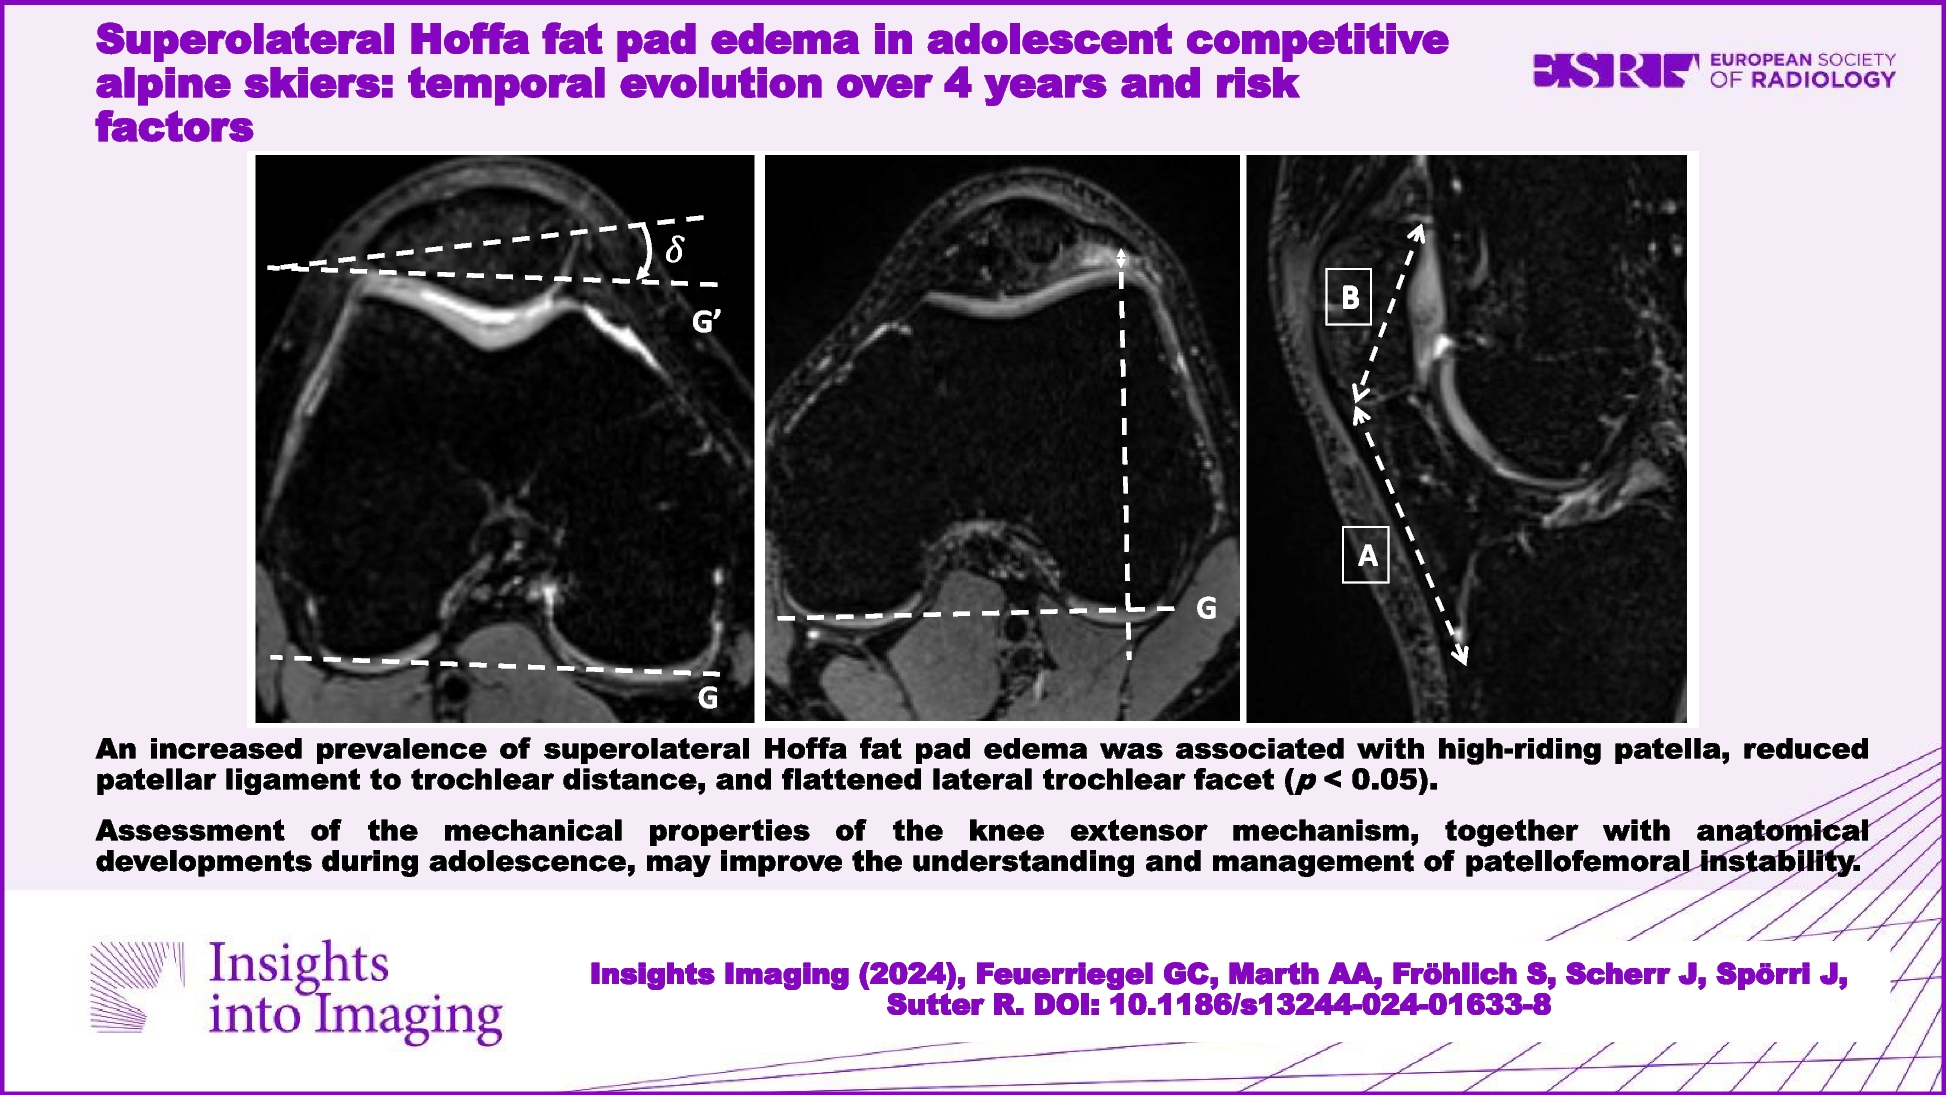 Superolateral Hoffa fat pad edema in adolescent competitive alpine skiers: temporal evolution over 4 years and risk factors